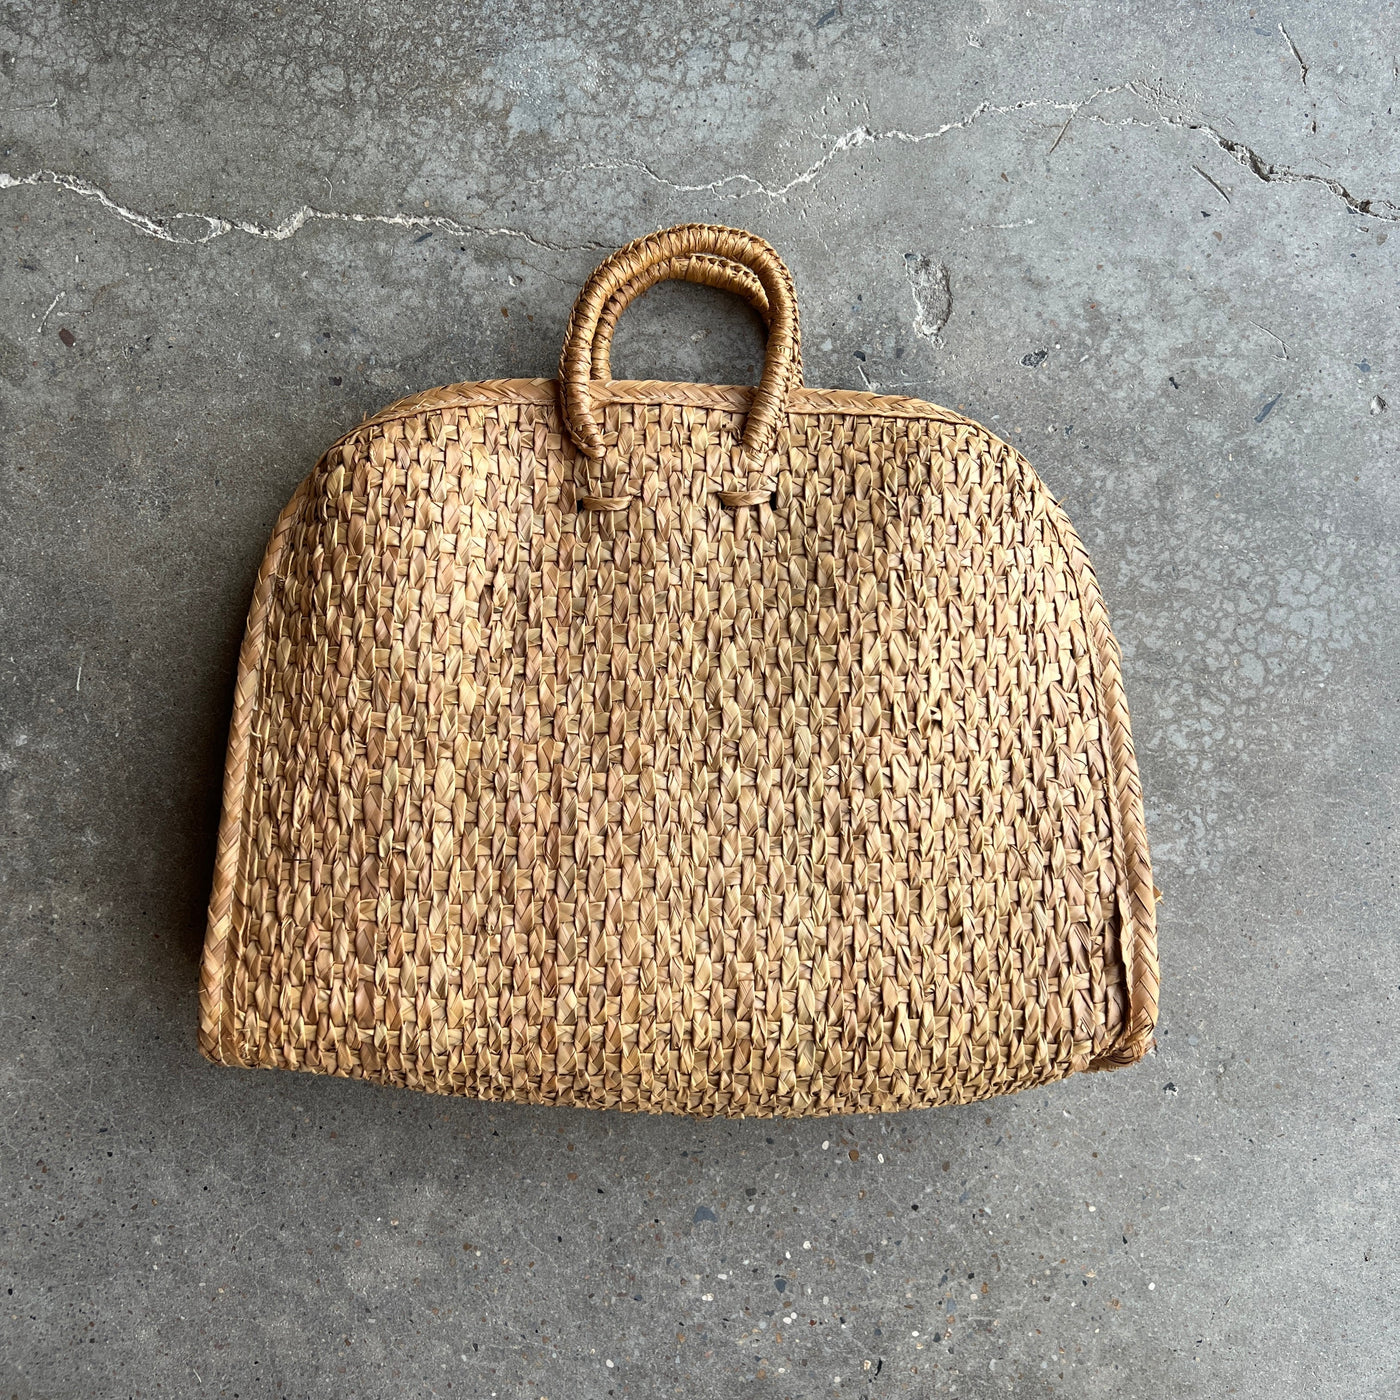 Vintage Straw Woven Tote